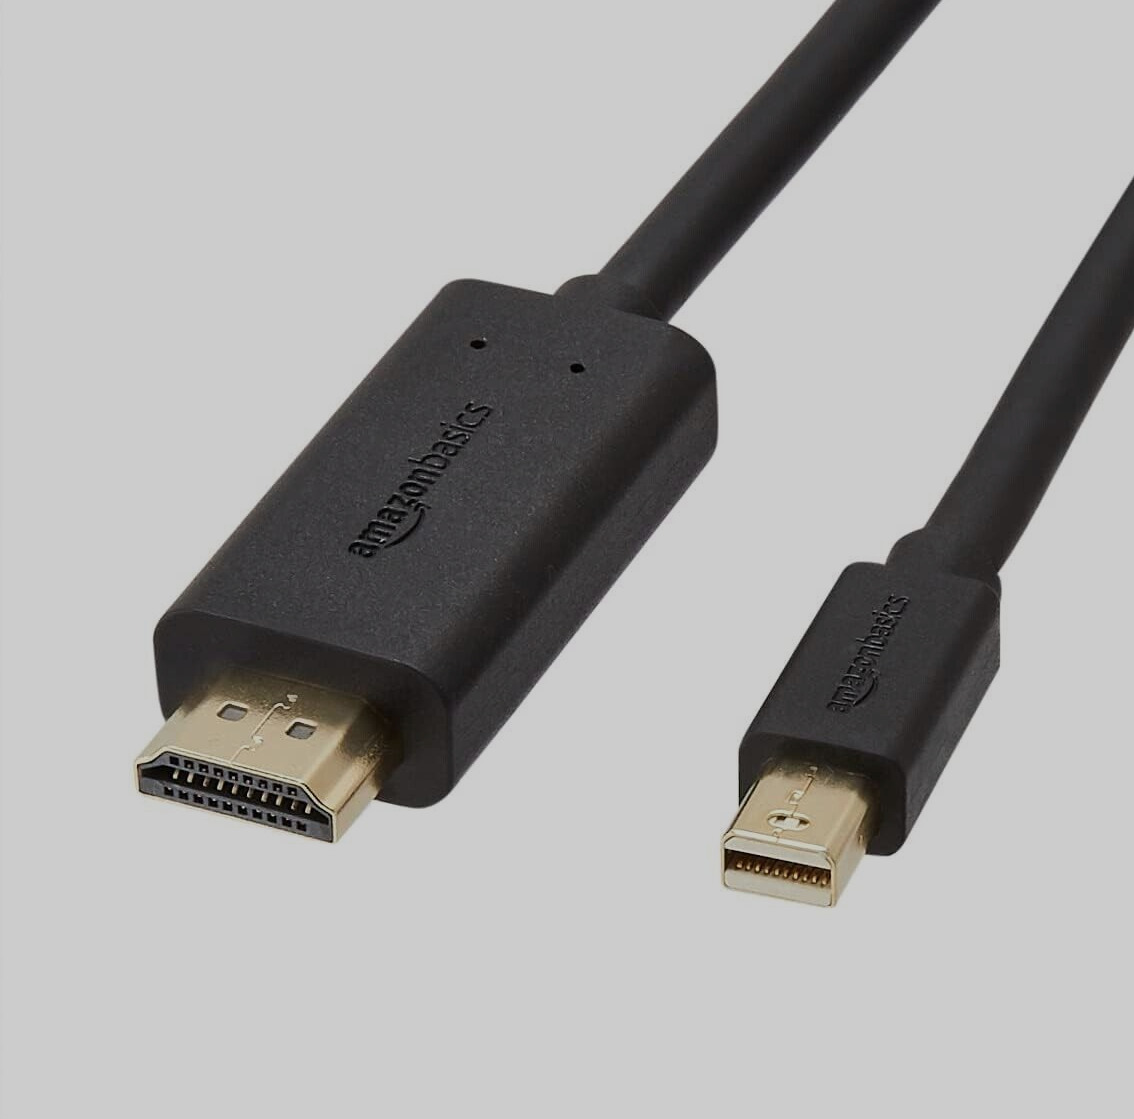 AmazonBasics Mini DisplayPort to HDMI Cable - 3 Feet Gold-plated connectors BX23